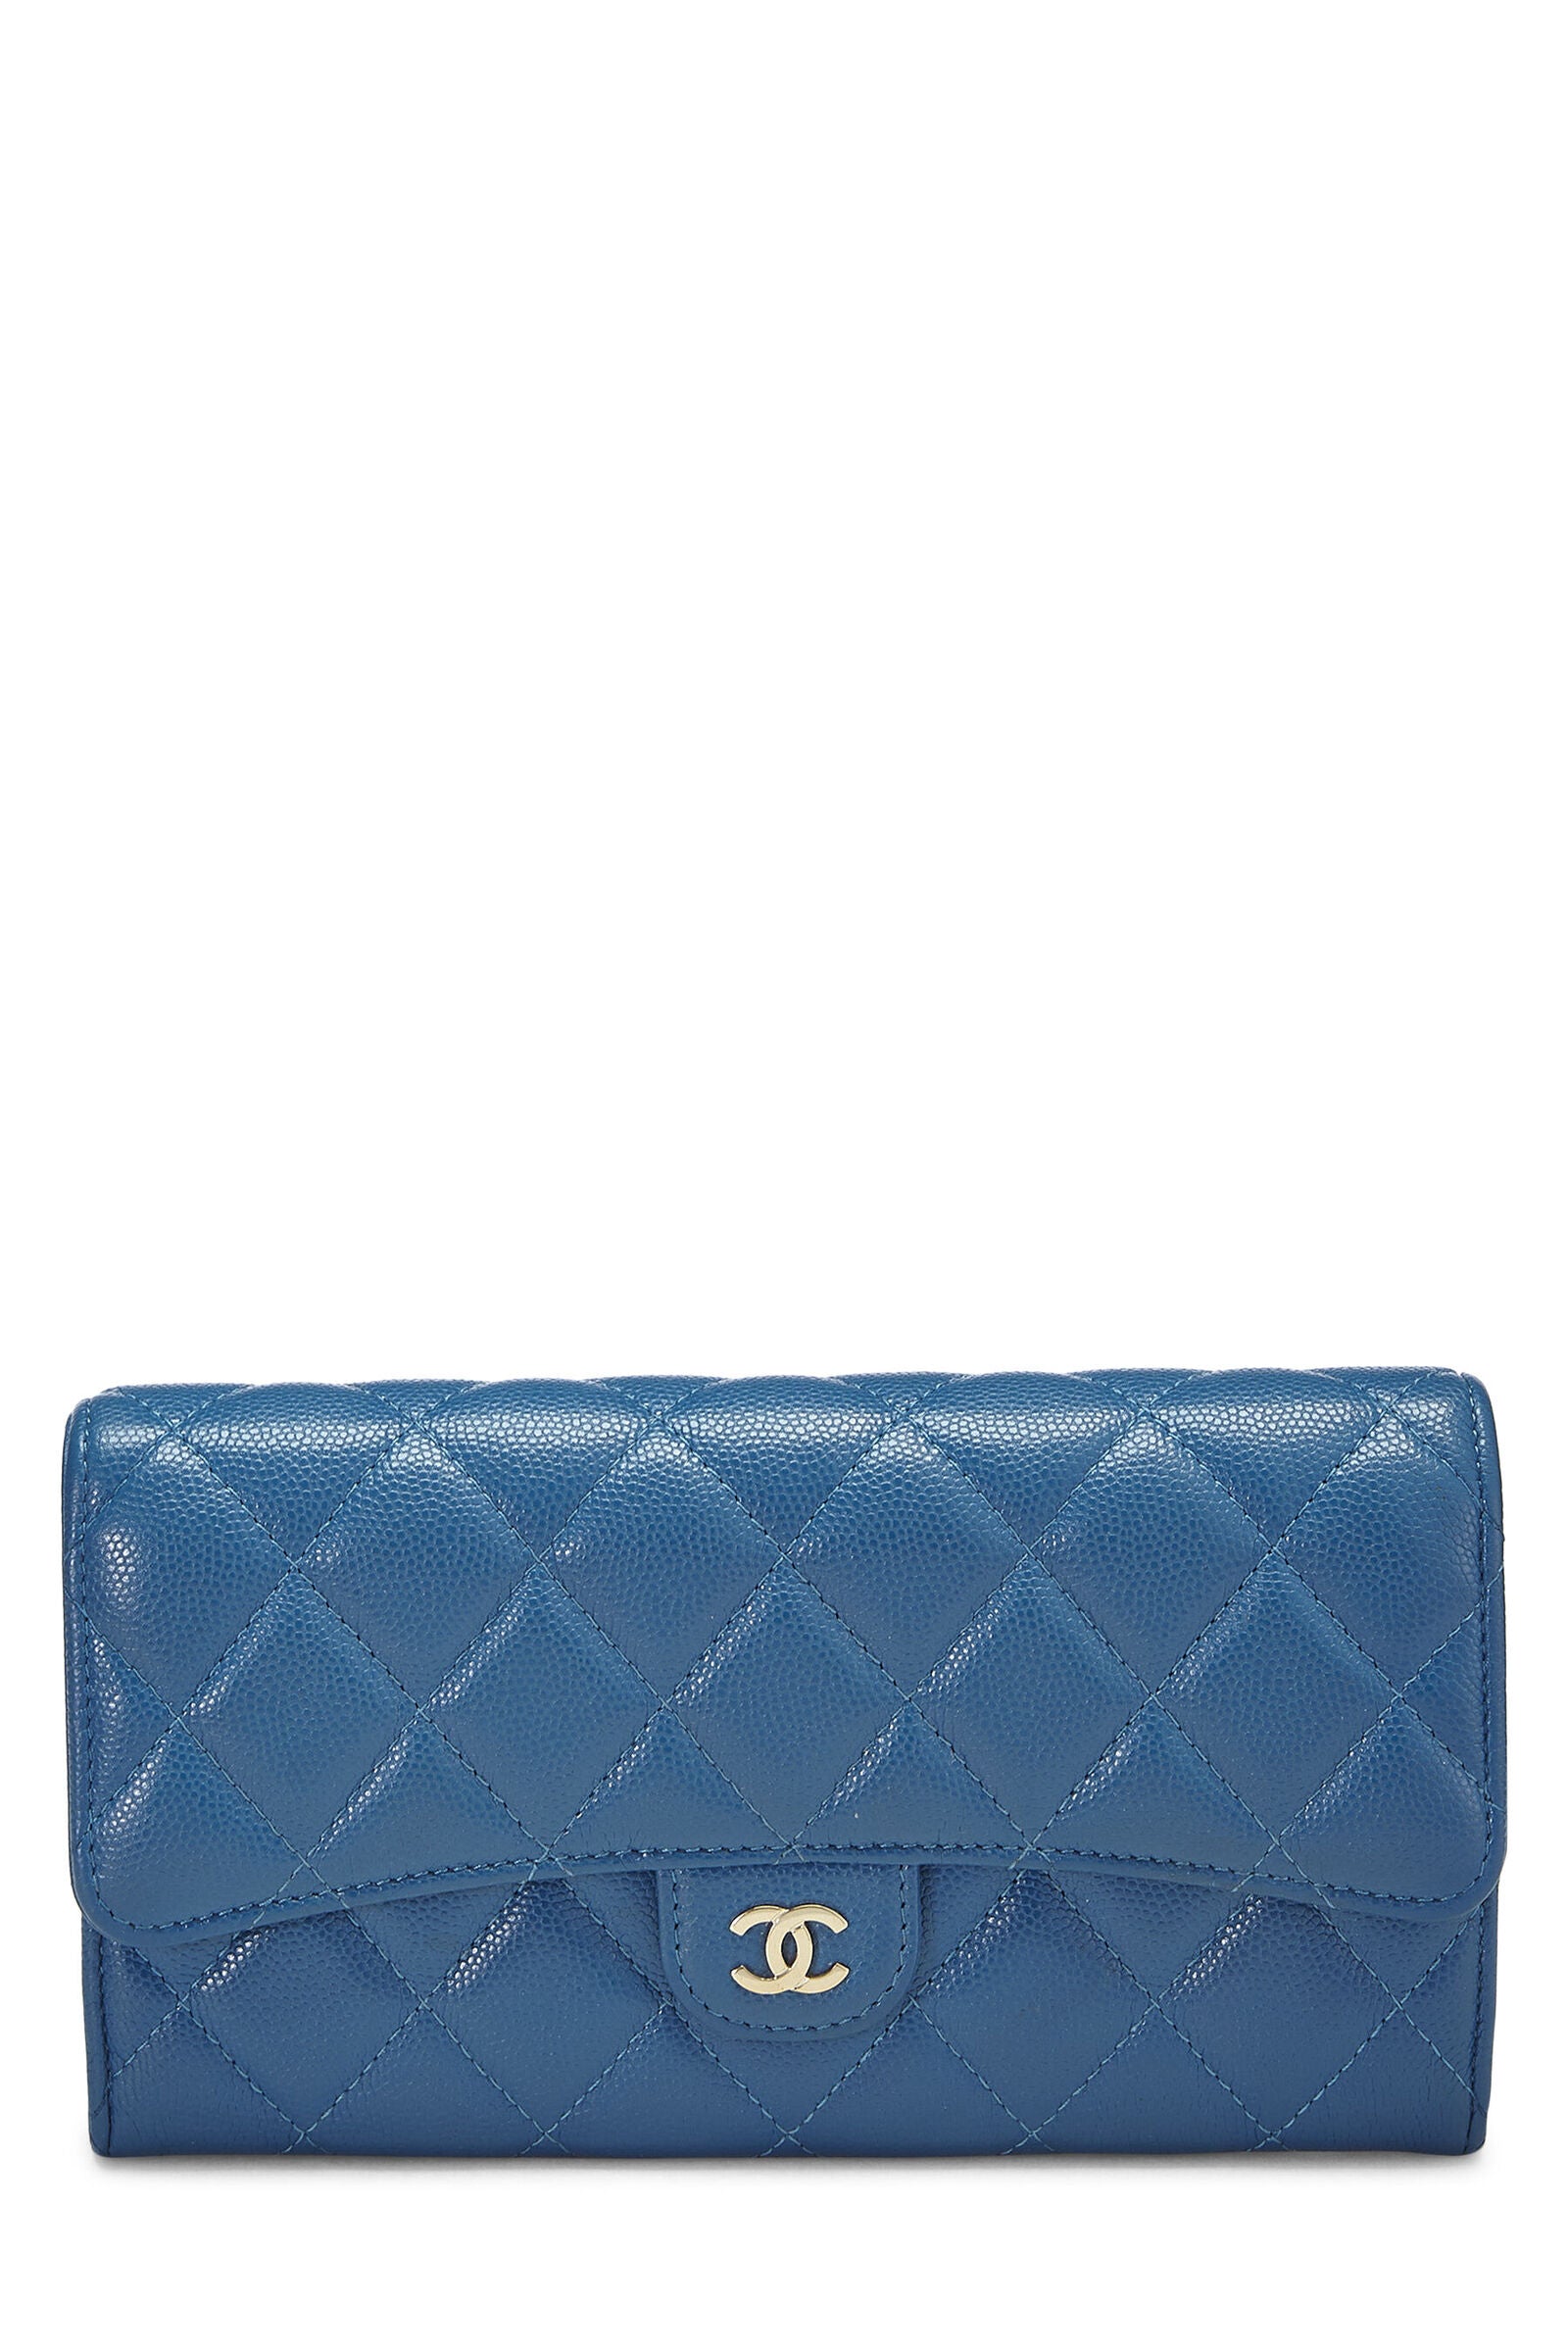 Chanel Classic Flap Wallet Blue Caviar Gold Hardware